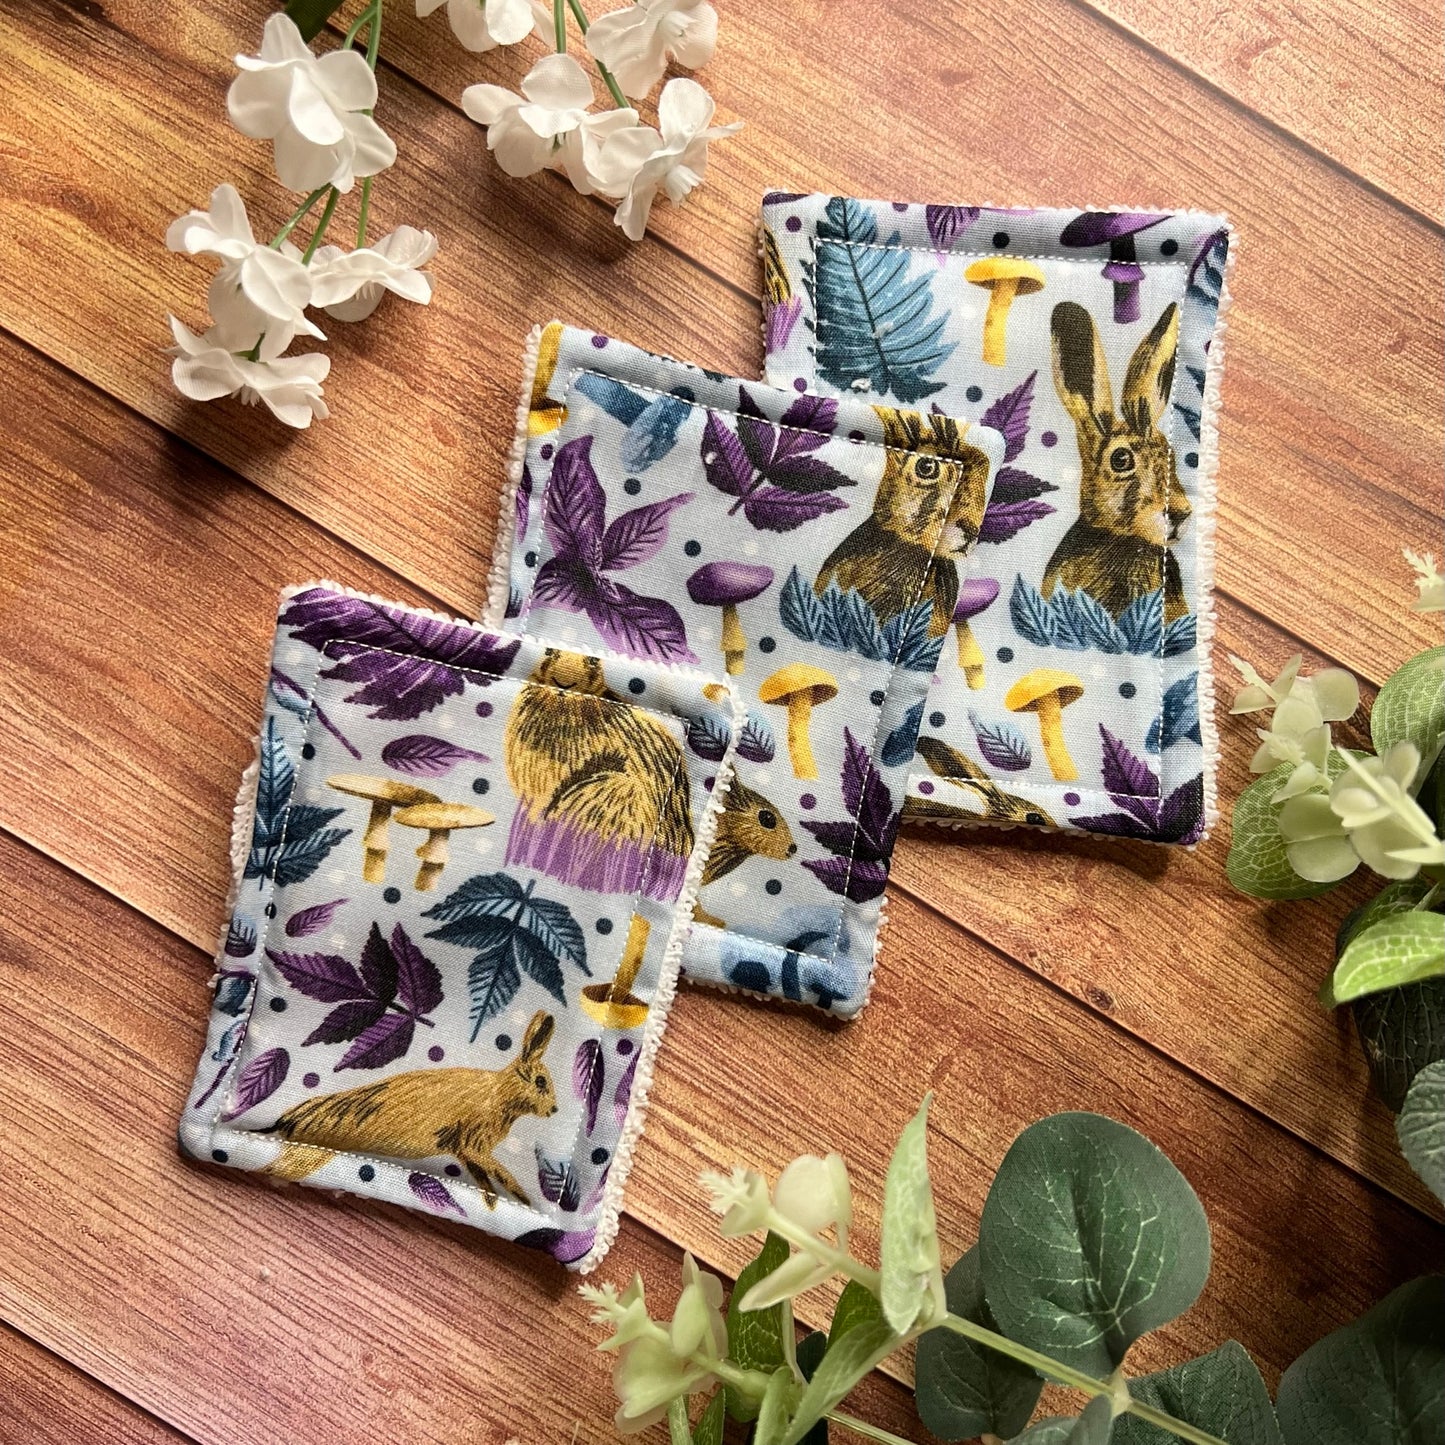 shop reusable skincare and improve your sustainable skincare routine with our reusable exfoliating face pads. These are great as a gift for someone who loves hares, or someone who enjoys rabbit accessories.